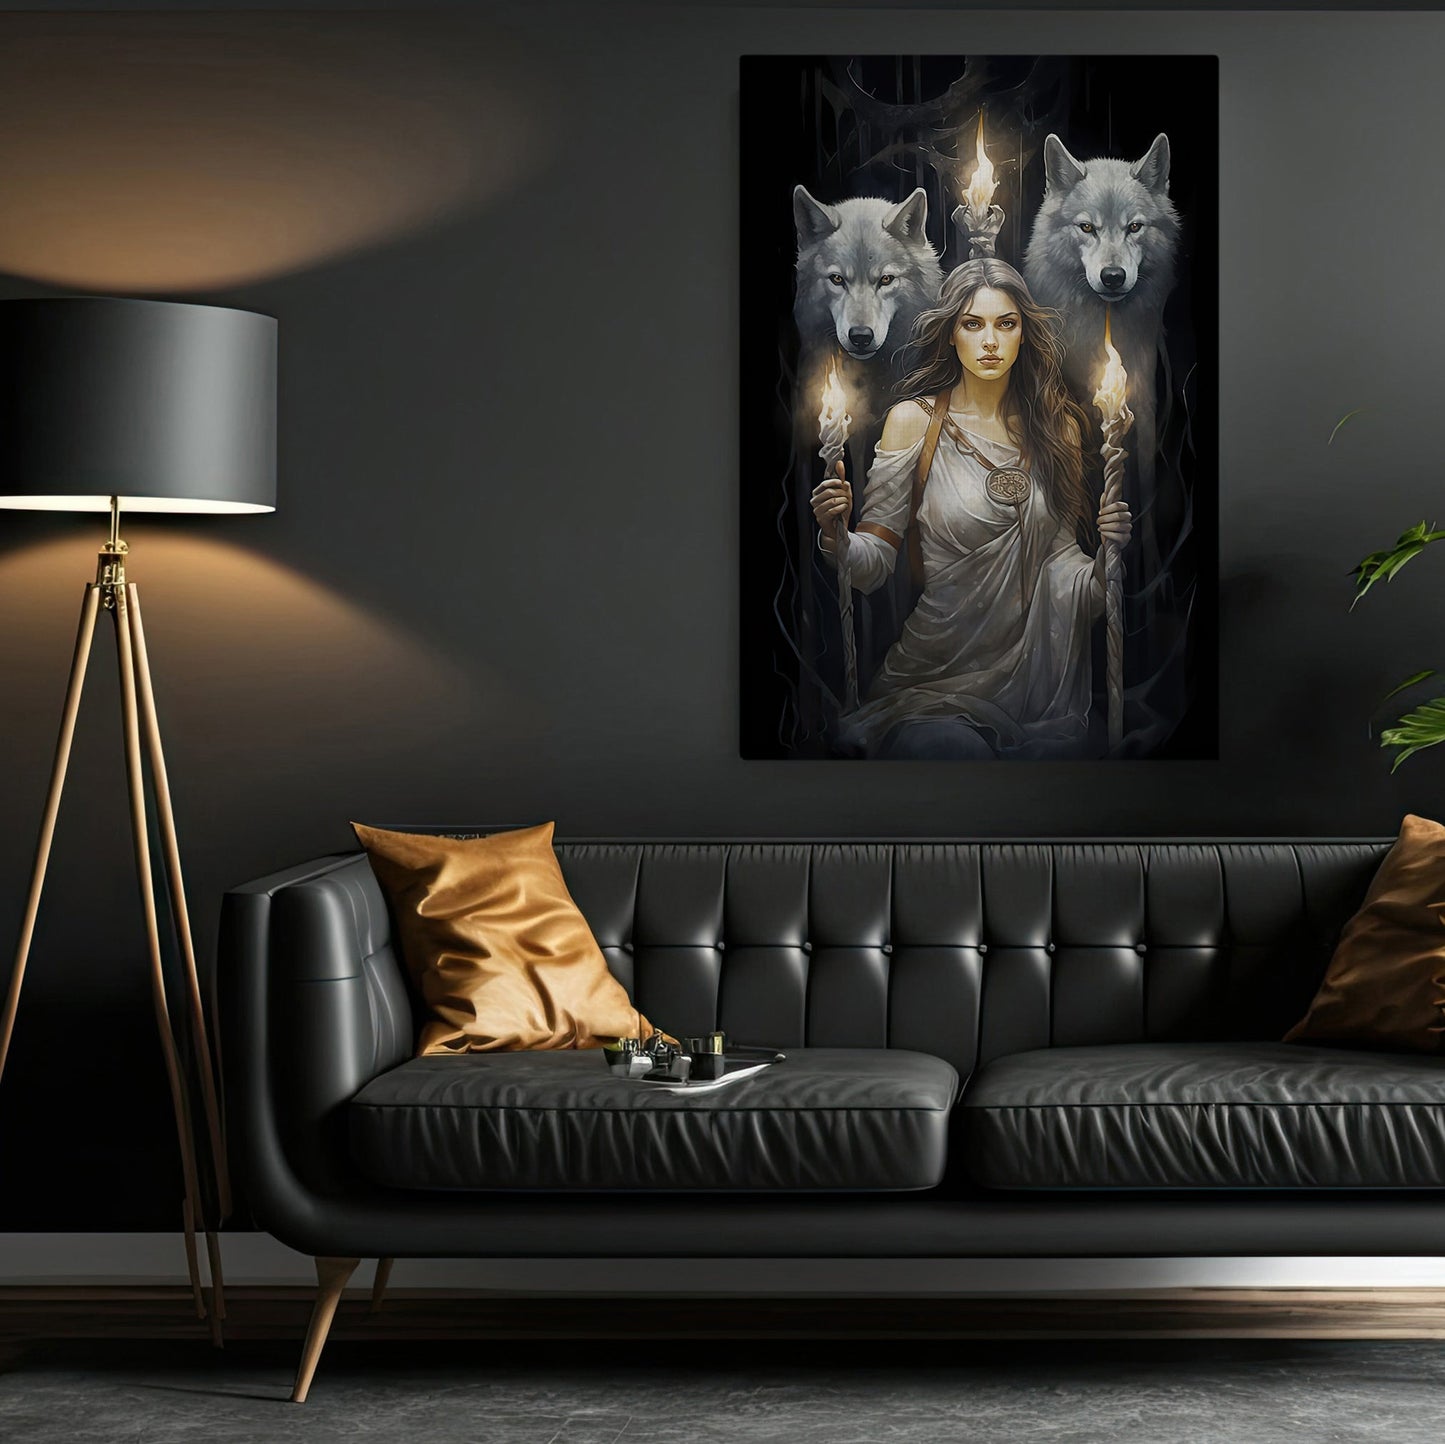 Goddess Protector Of Women With Wolf, Goddess Canvas Painting, Wall Art Decor - Victorian Goddess Poster Gift